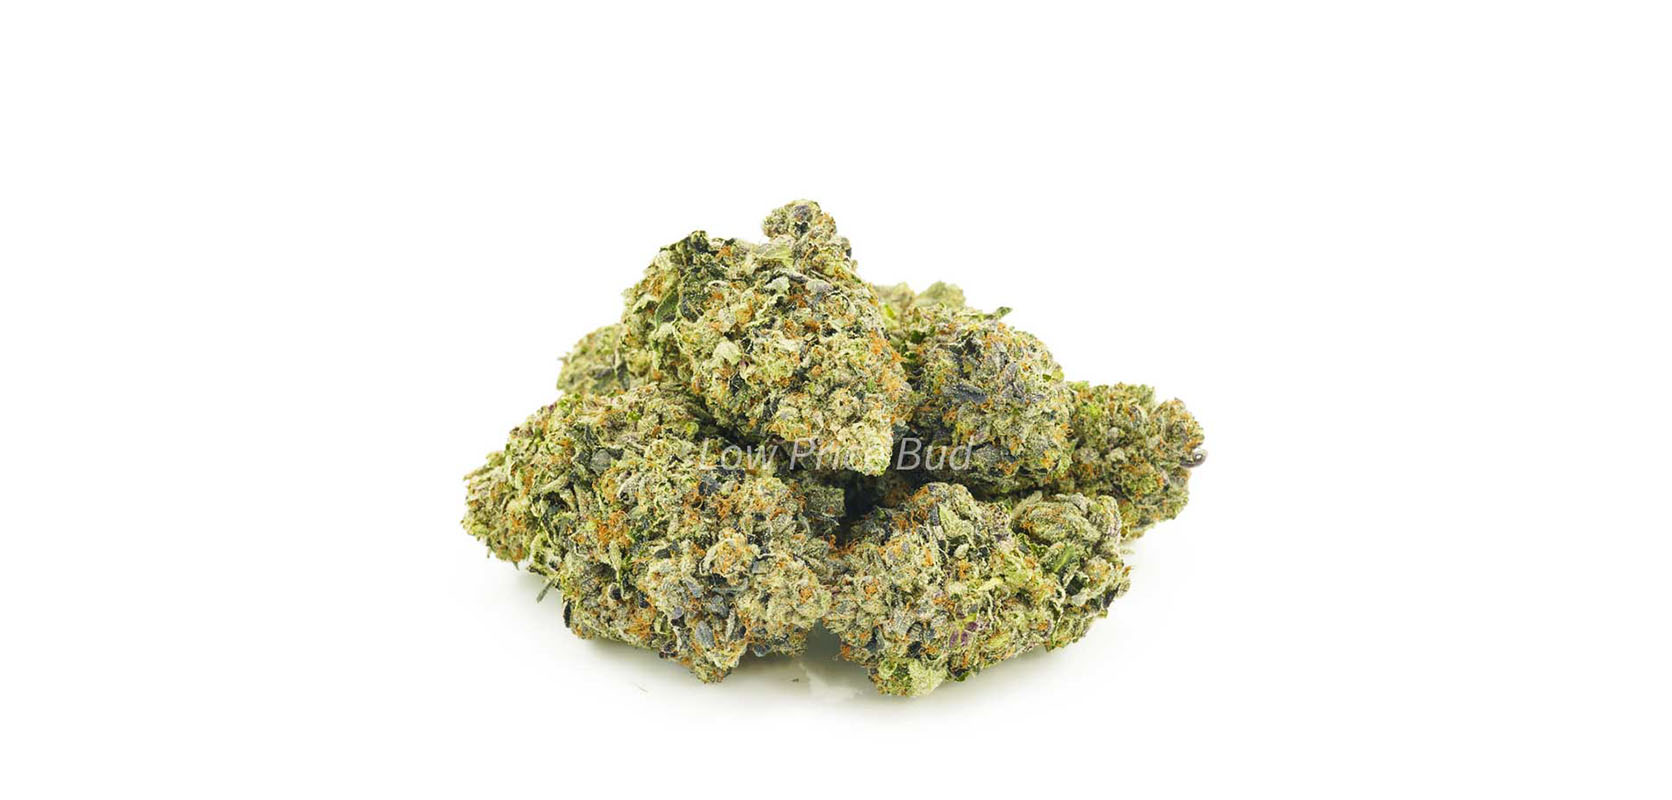 Bubba Kush weed online Canada. Order weed online. Low Pice Bud Cheap Weed.